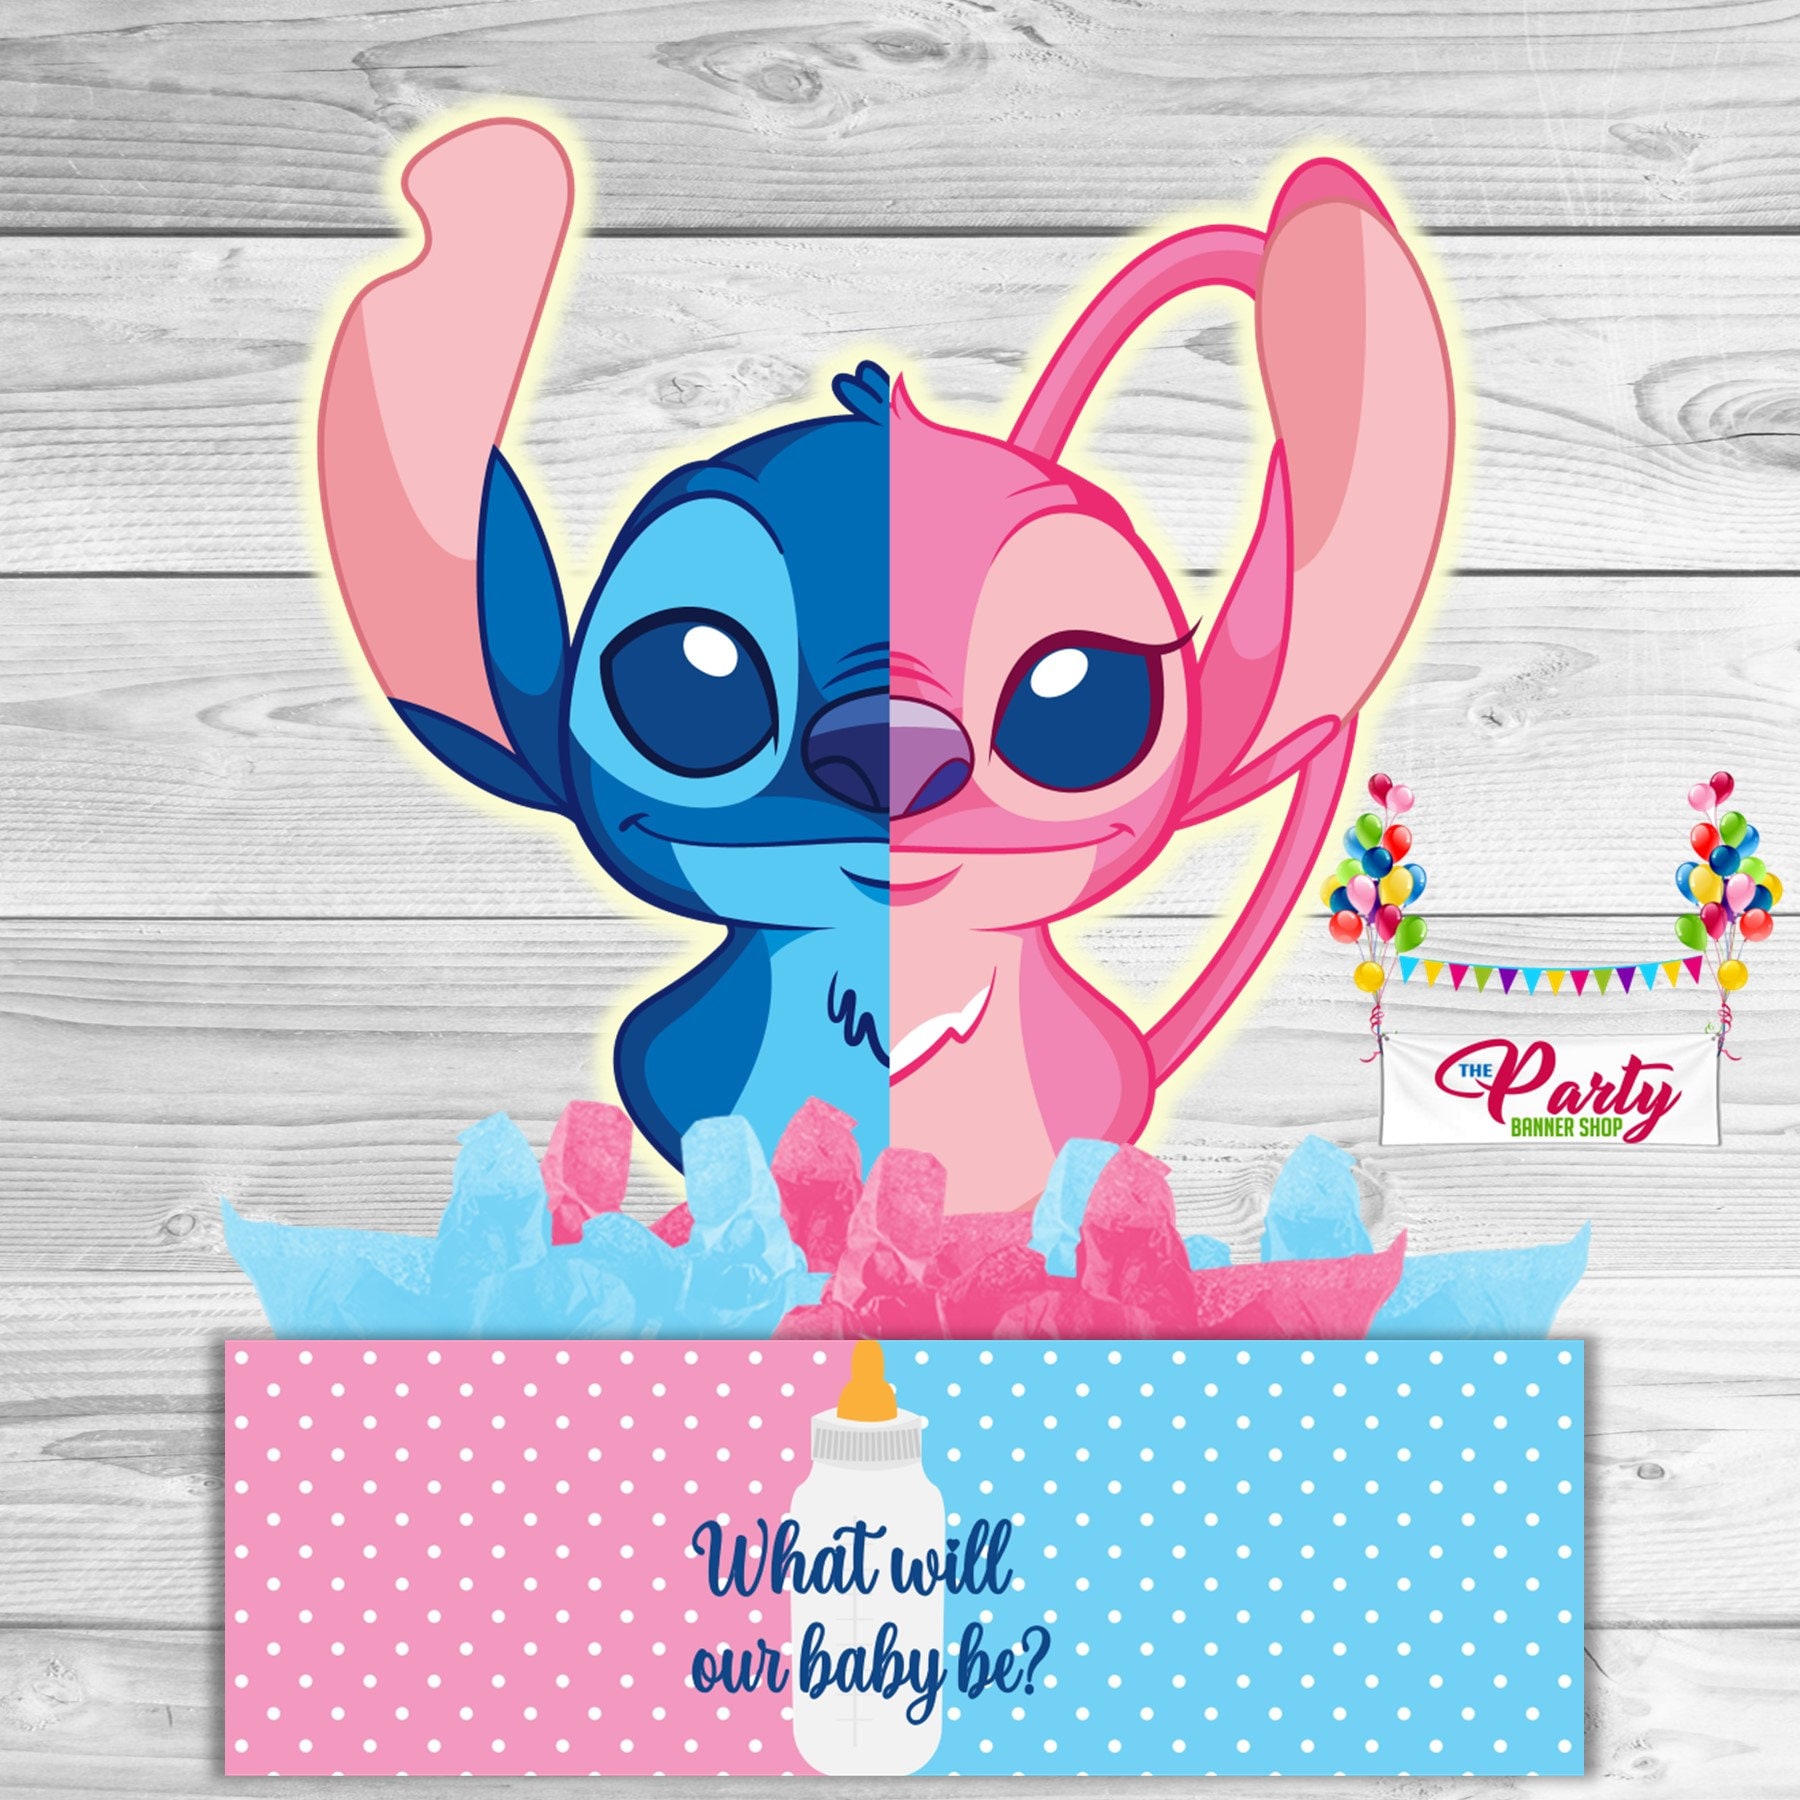 Lilo and Stitch Balloon Garland  Girl birthday decorations, Baby gender  reveal party decorations, Gender reveal party decorations